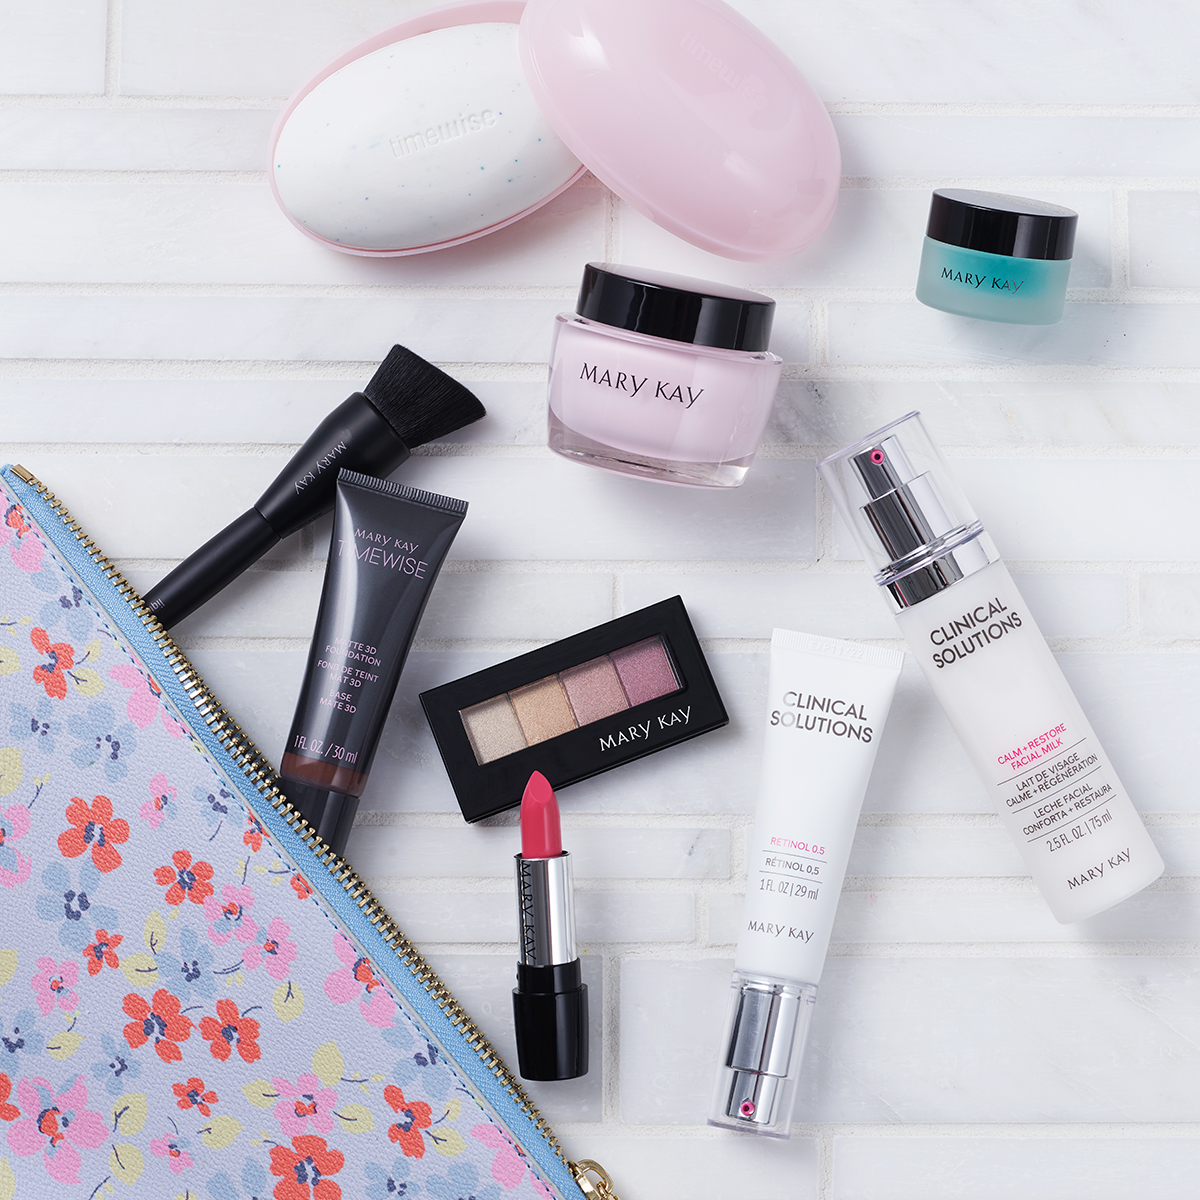 Marykay products